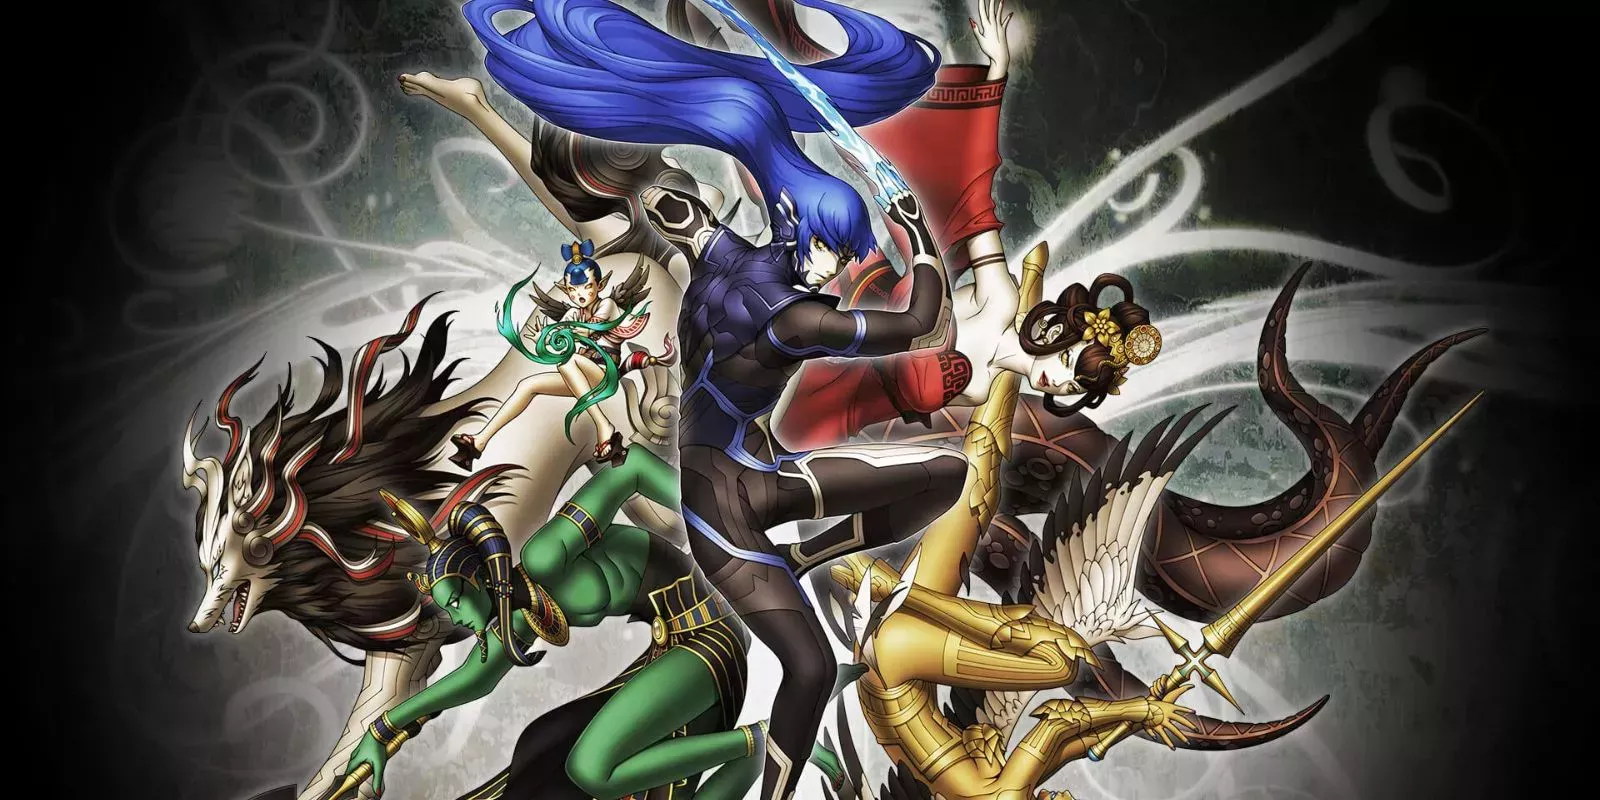 Shin Megami Tensei V key art featuring protagonist and various demons behind him.